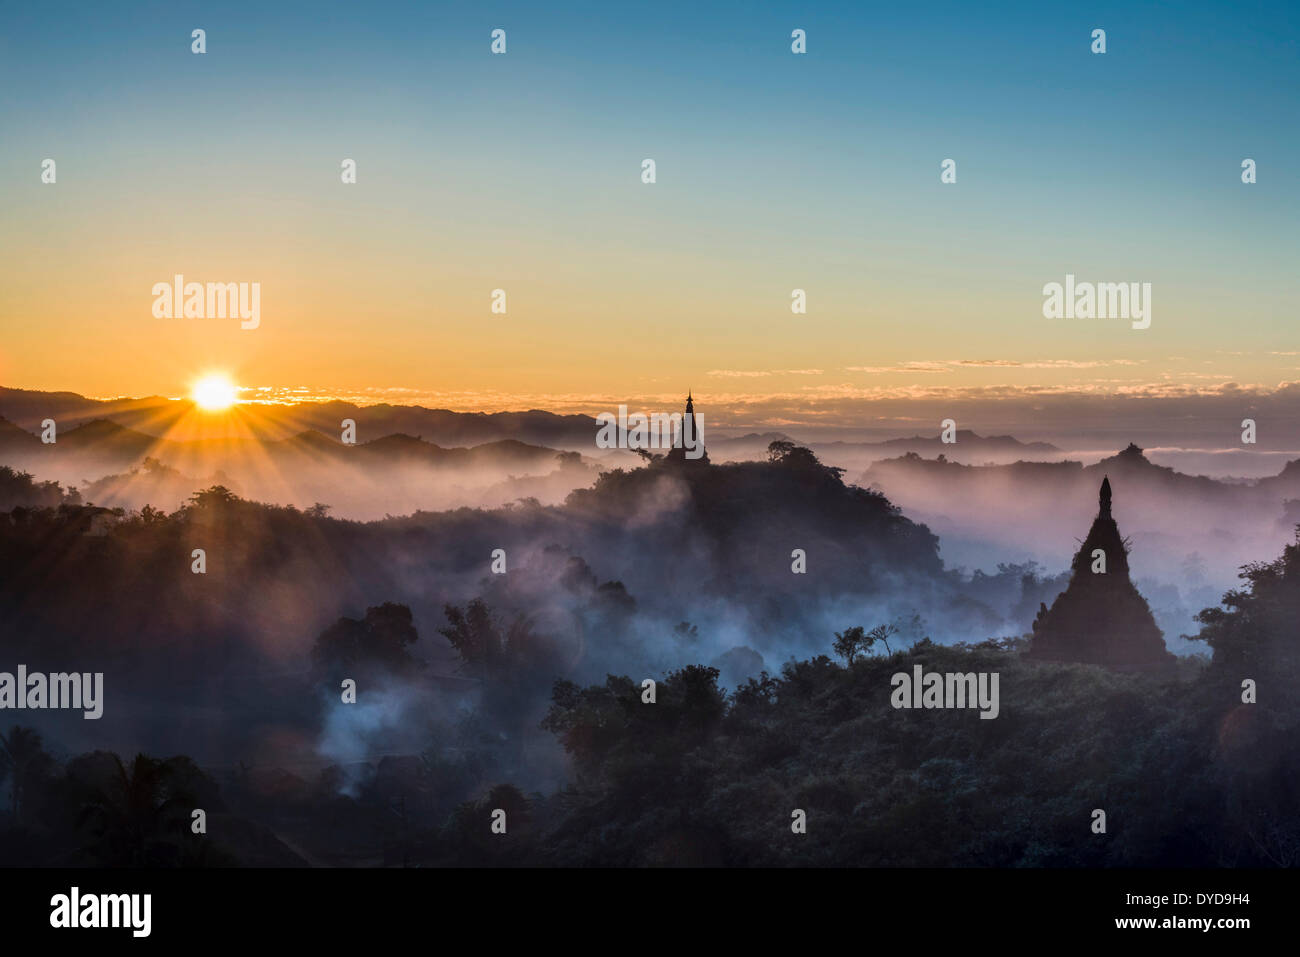 Pagodas surrounded by trees, at sunrise, in the mist, Mrauk U, Sittwe District, Rakhine State, Myanmar Stock Photo